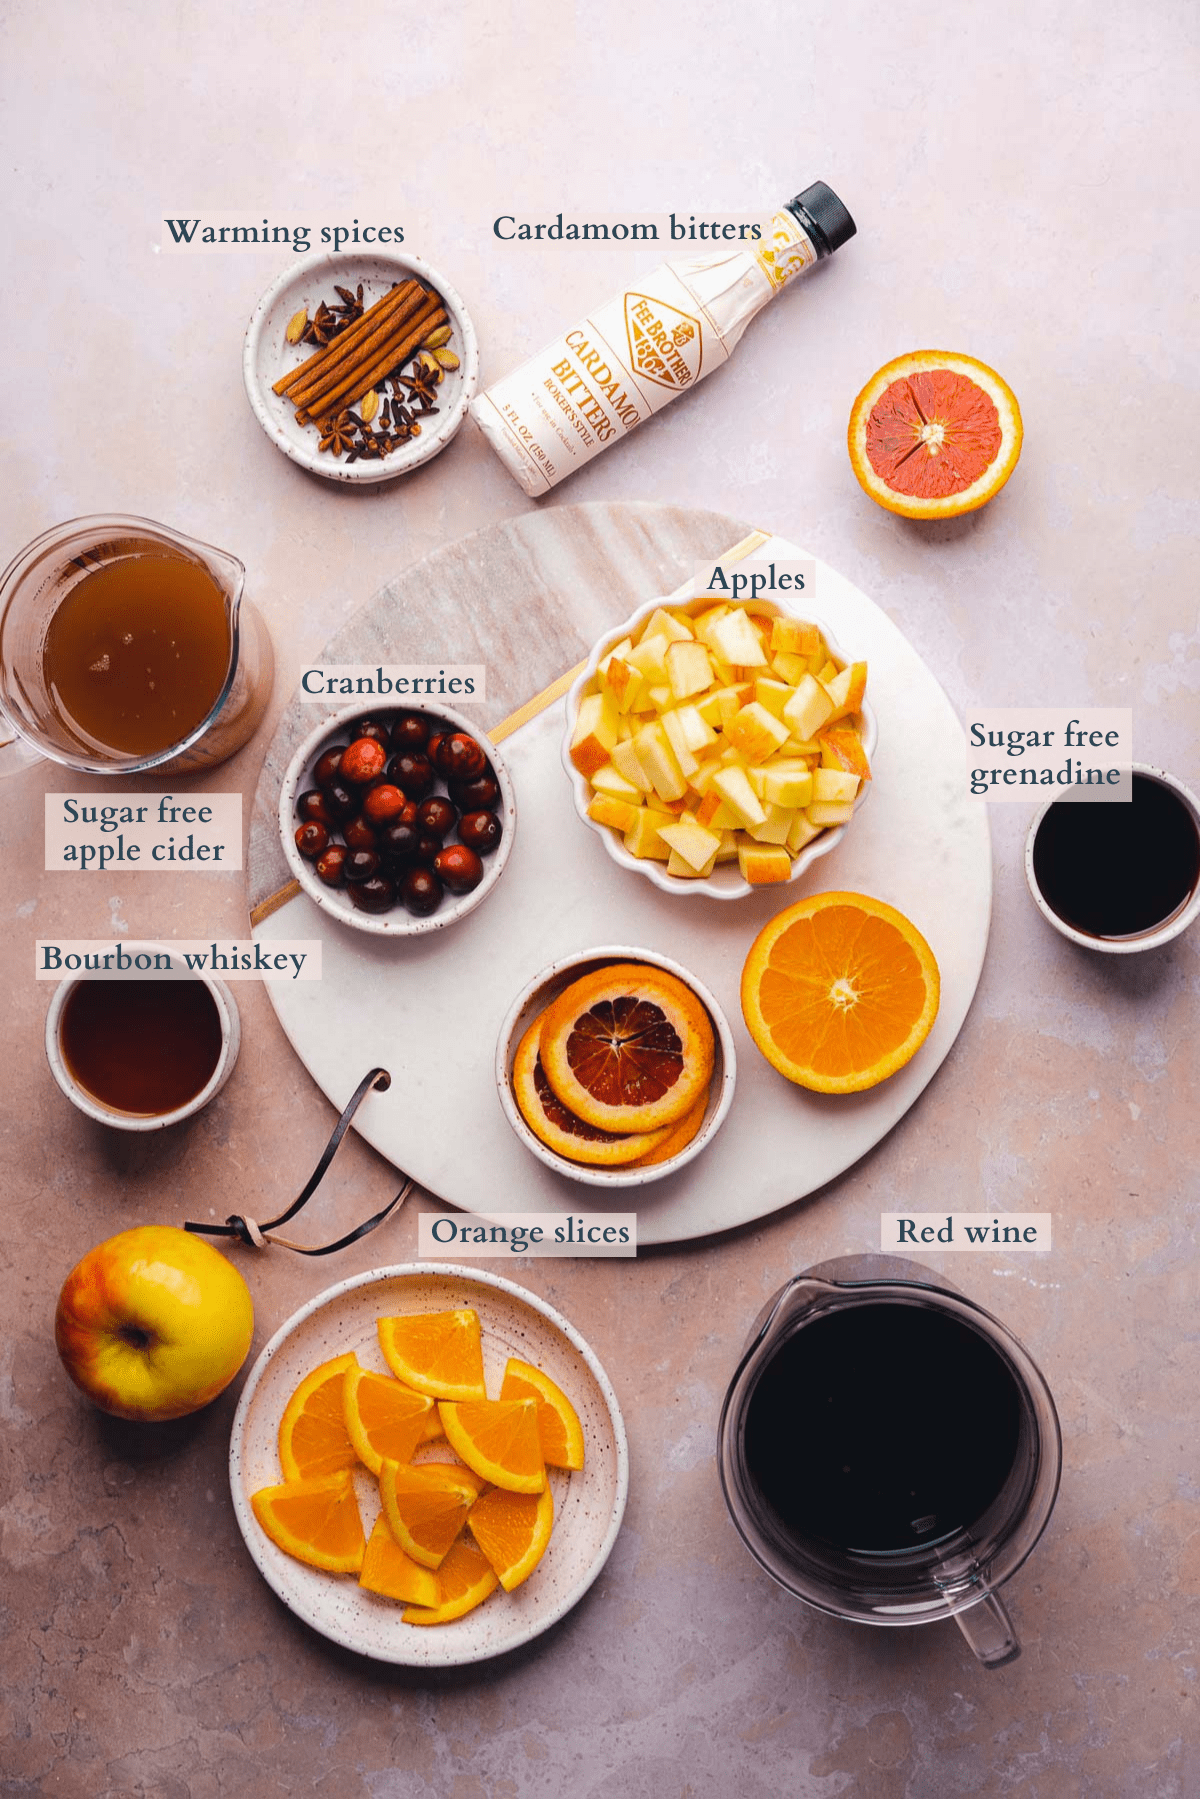 bourbon whiskey sangria recipe ingredients with text to denote different ingredients